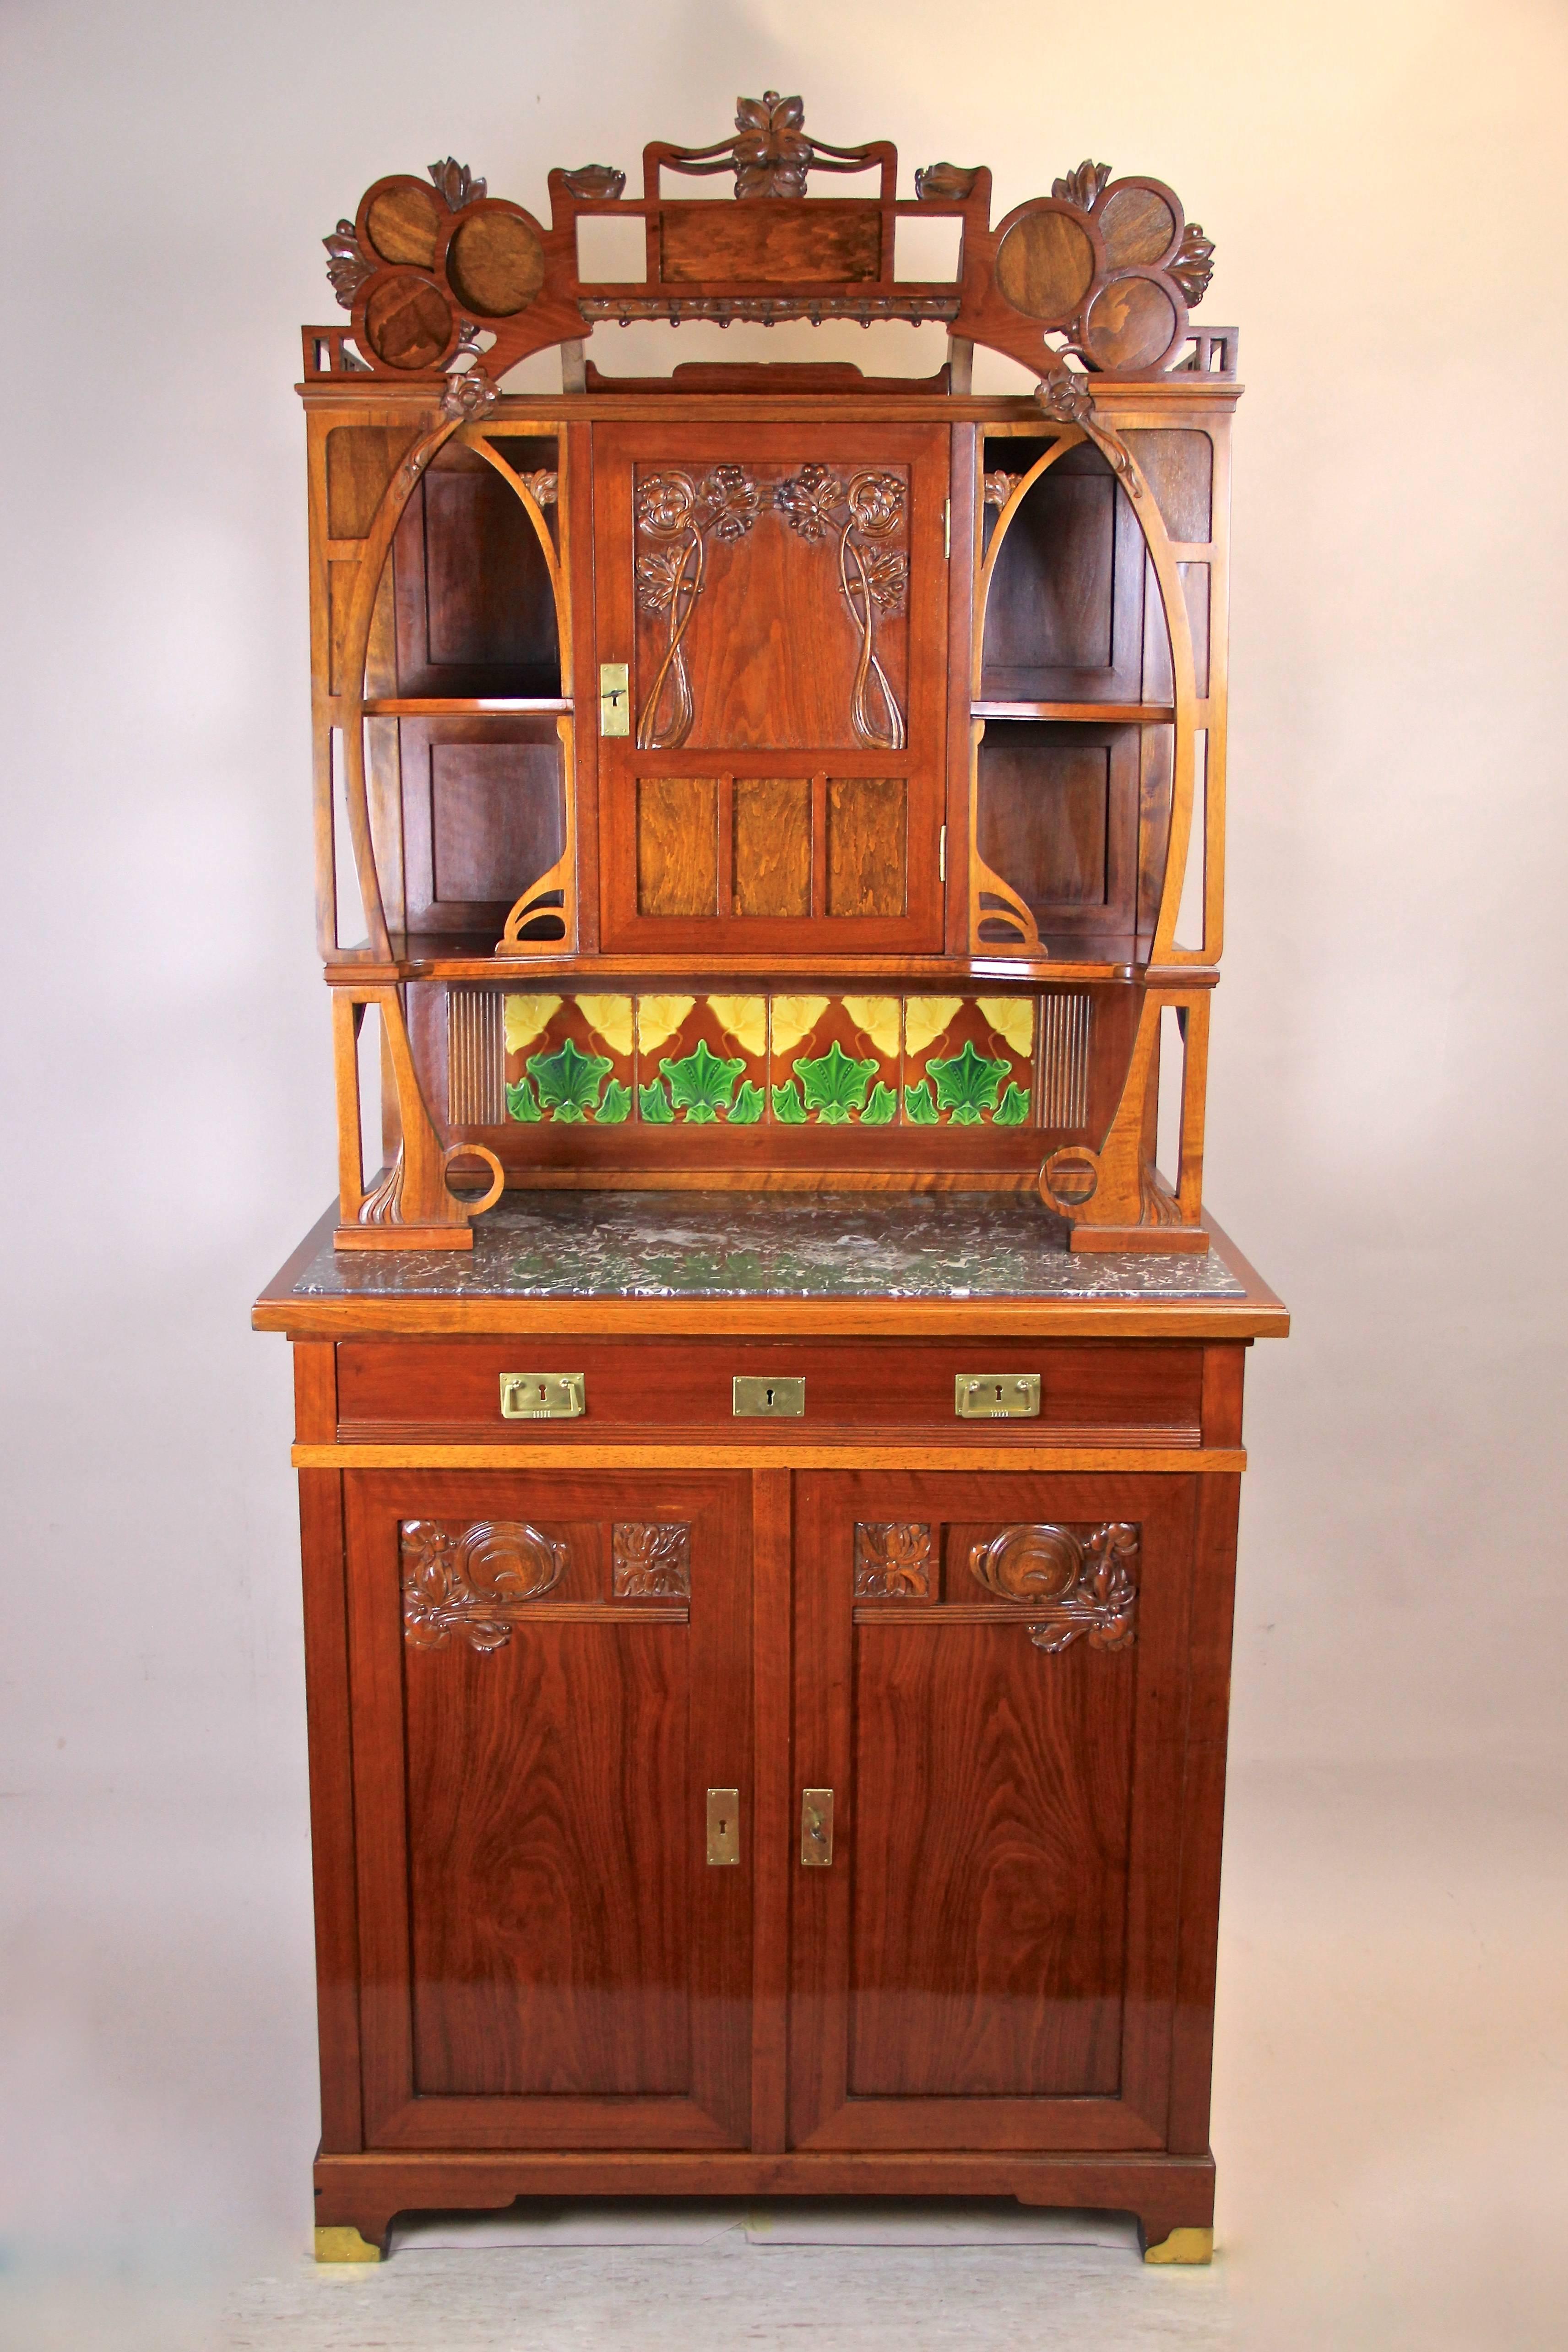 This amazing Art Nouveau cabinet originated from Austria circa 1900 takes up the design language of the Art Nouveau period at its best. It consists of a lower part with a drawer and two doors that shows wonderful hand-carved floral design. An